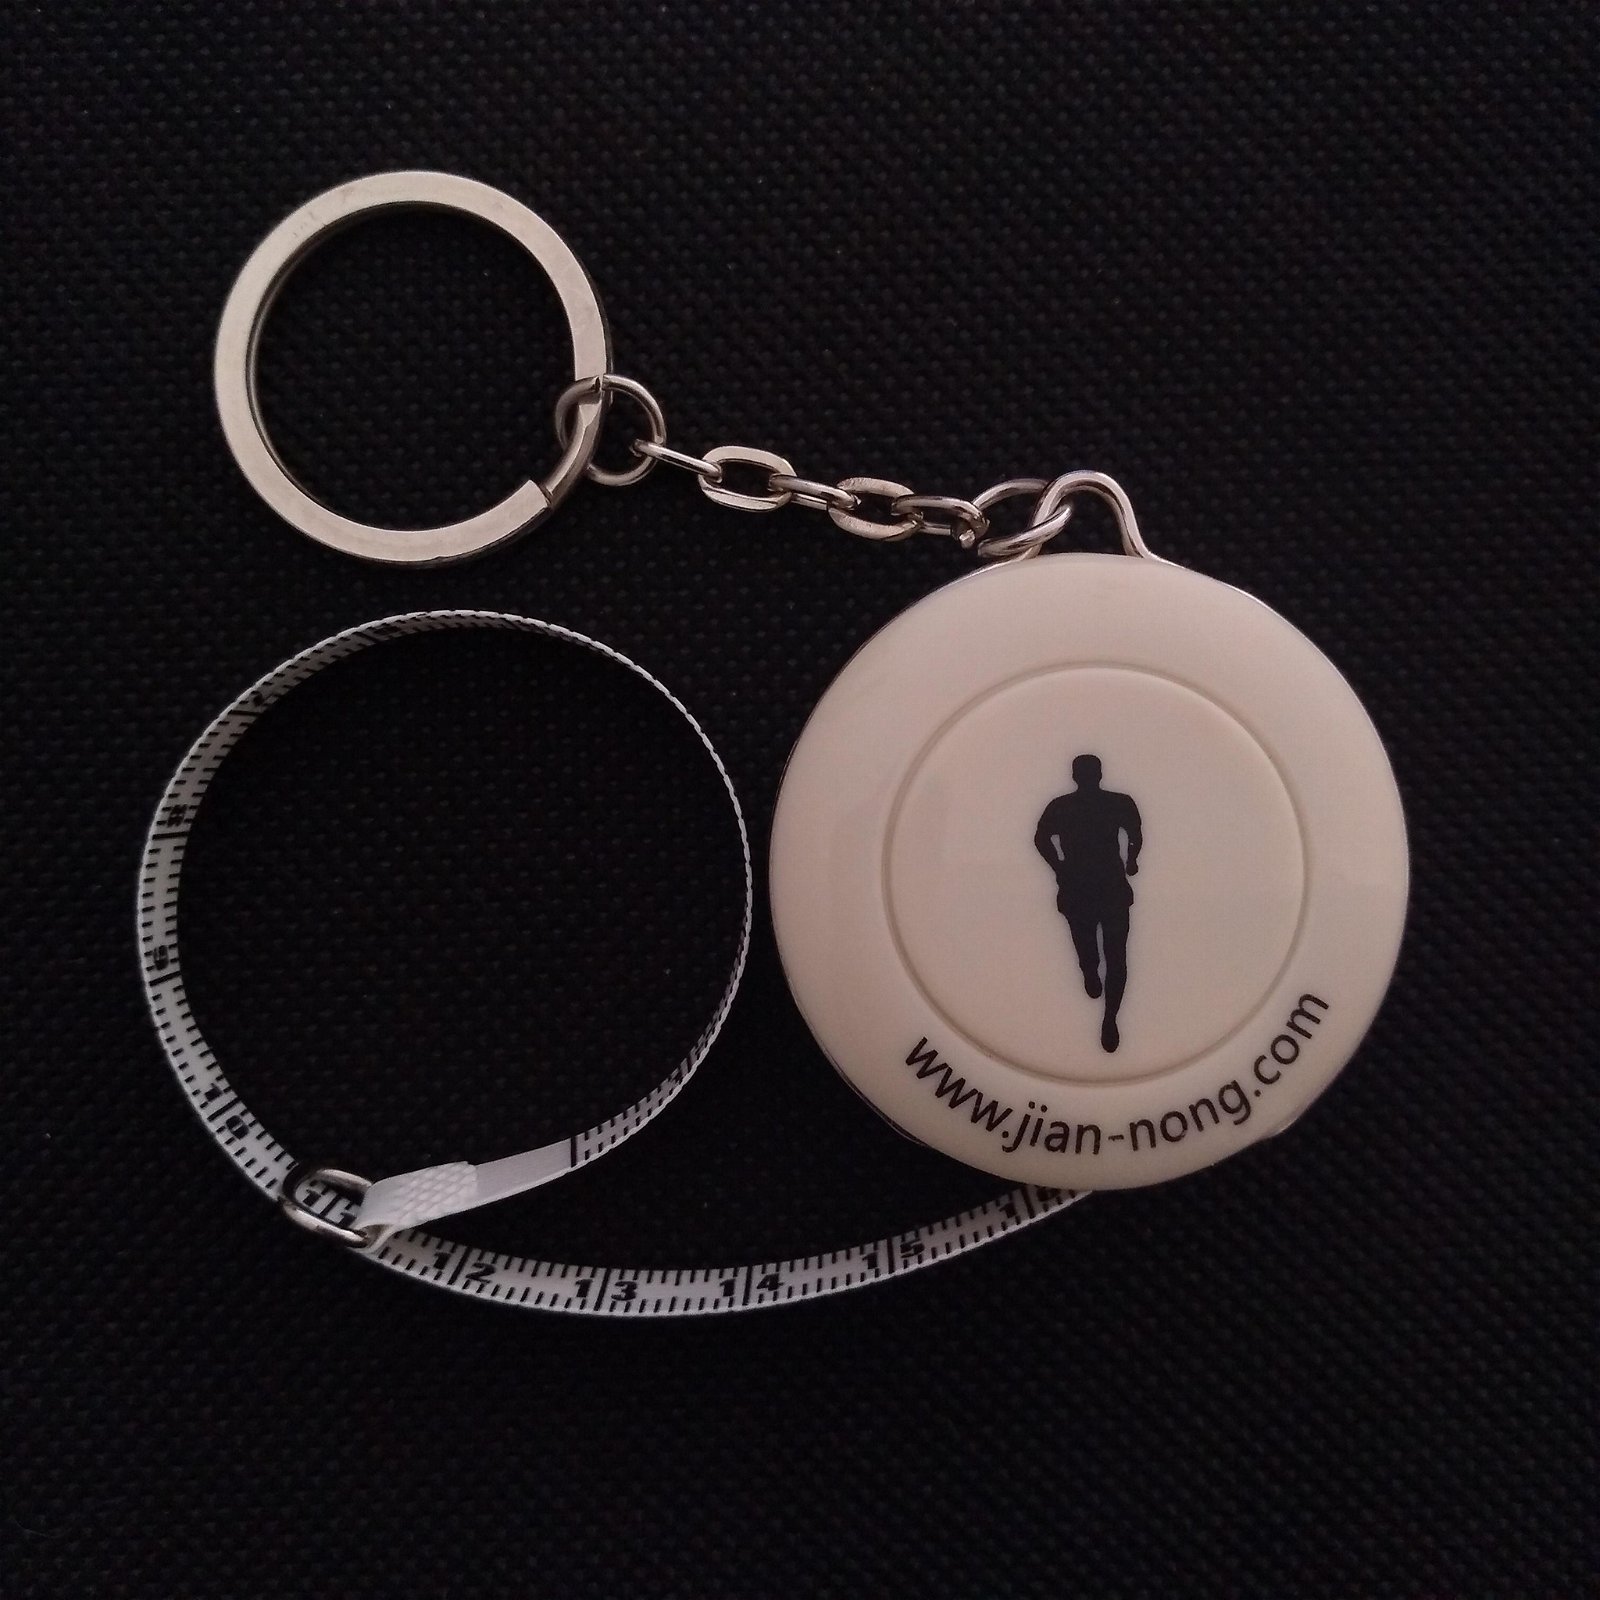 Keychain measuring tape for promotion gift